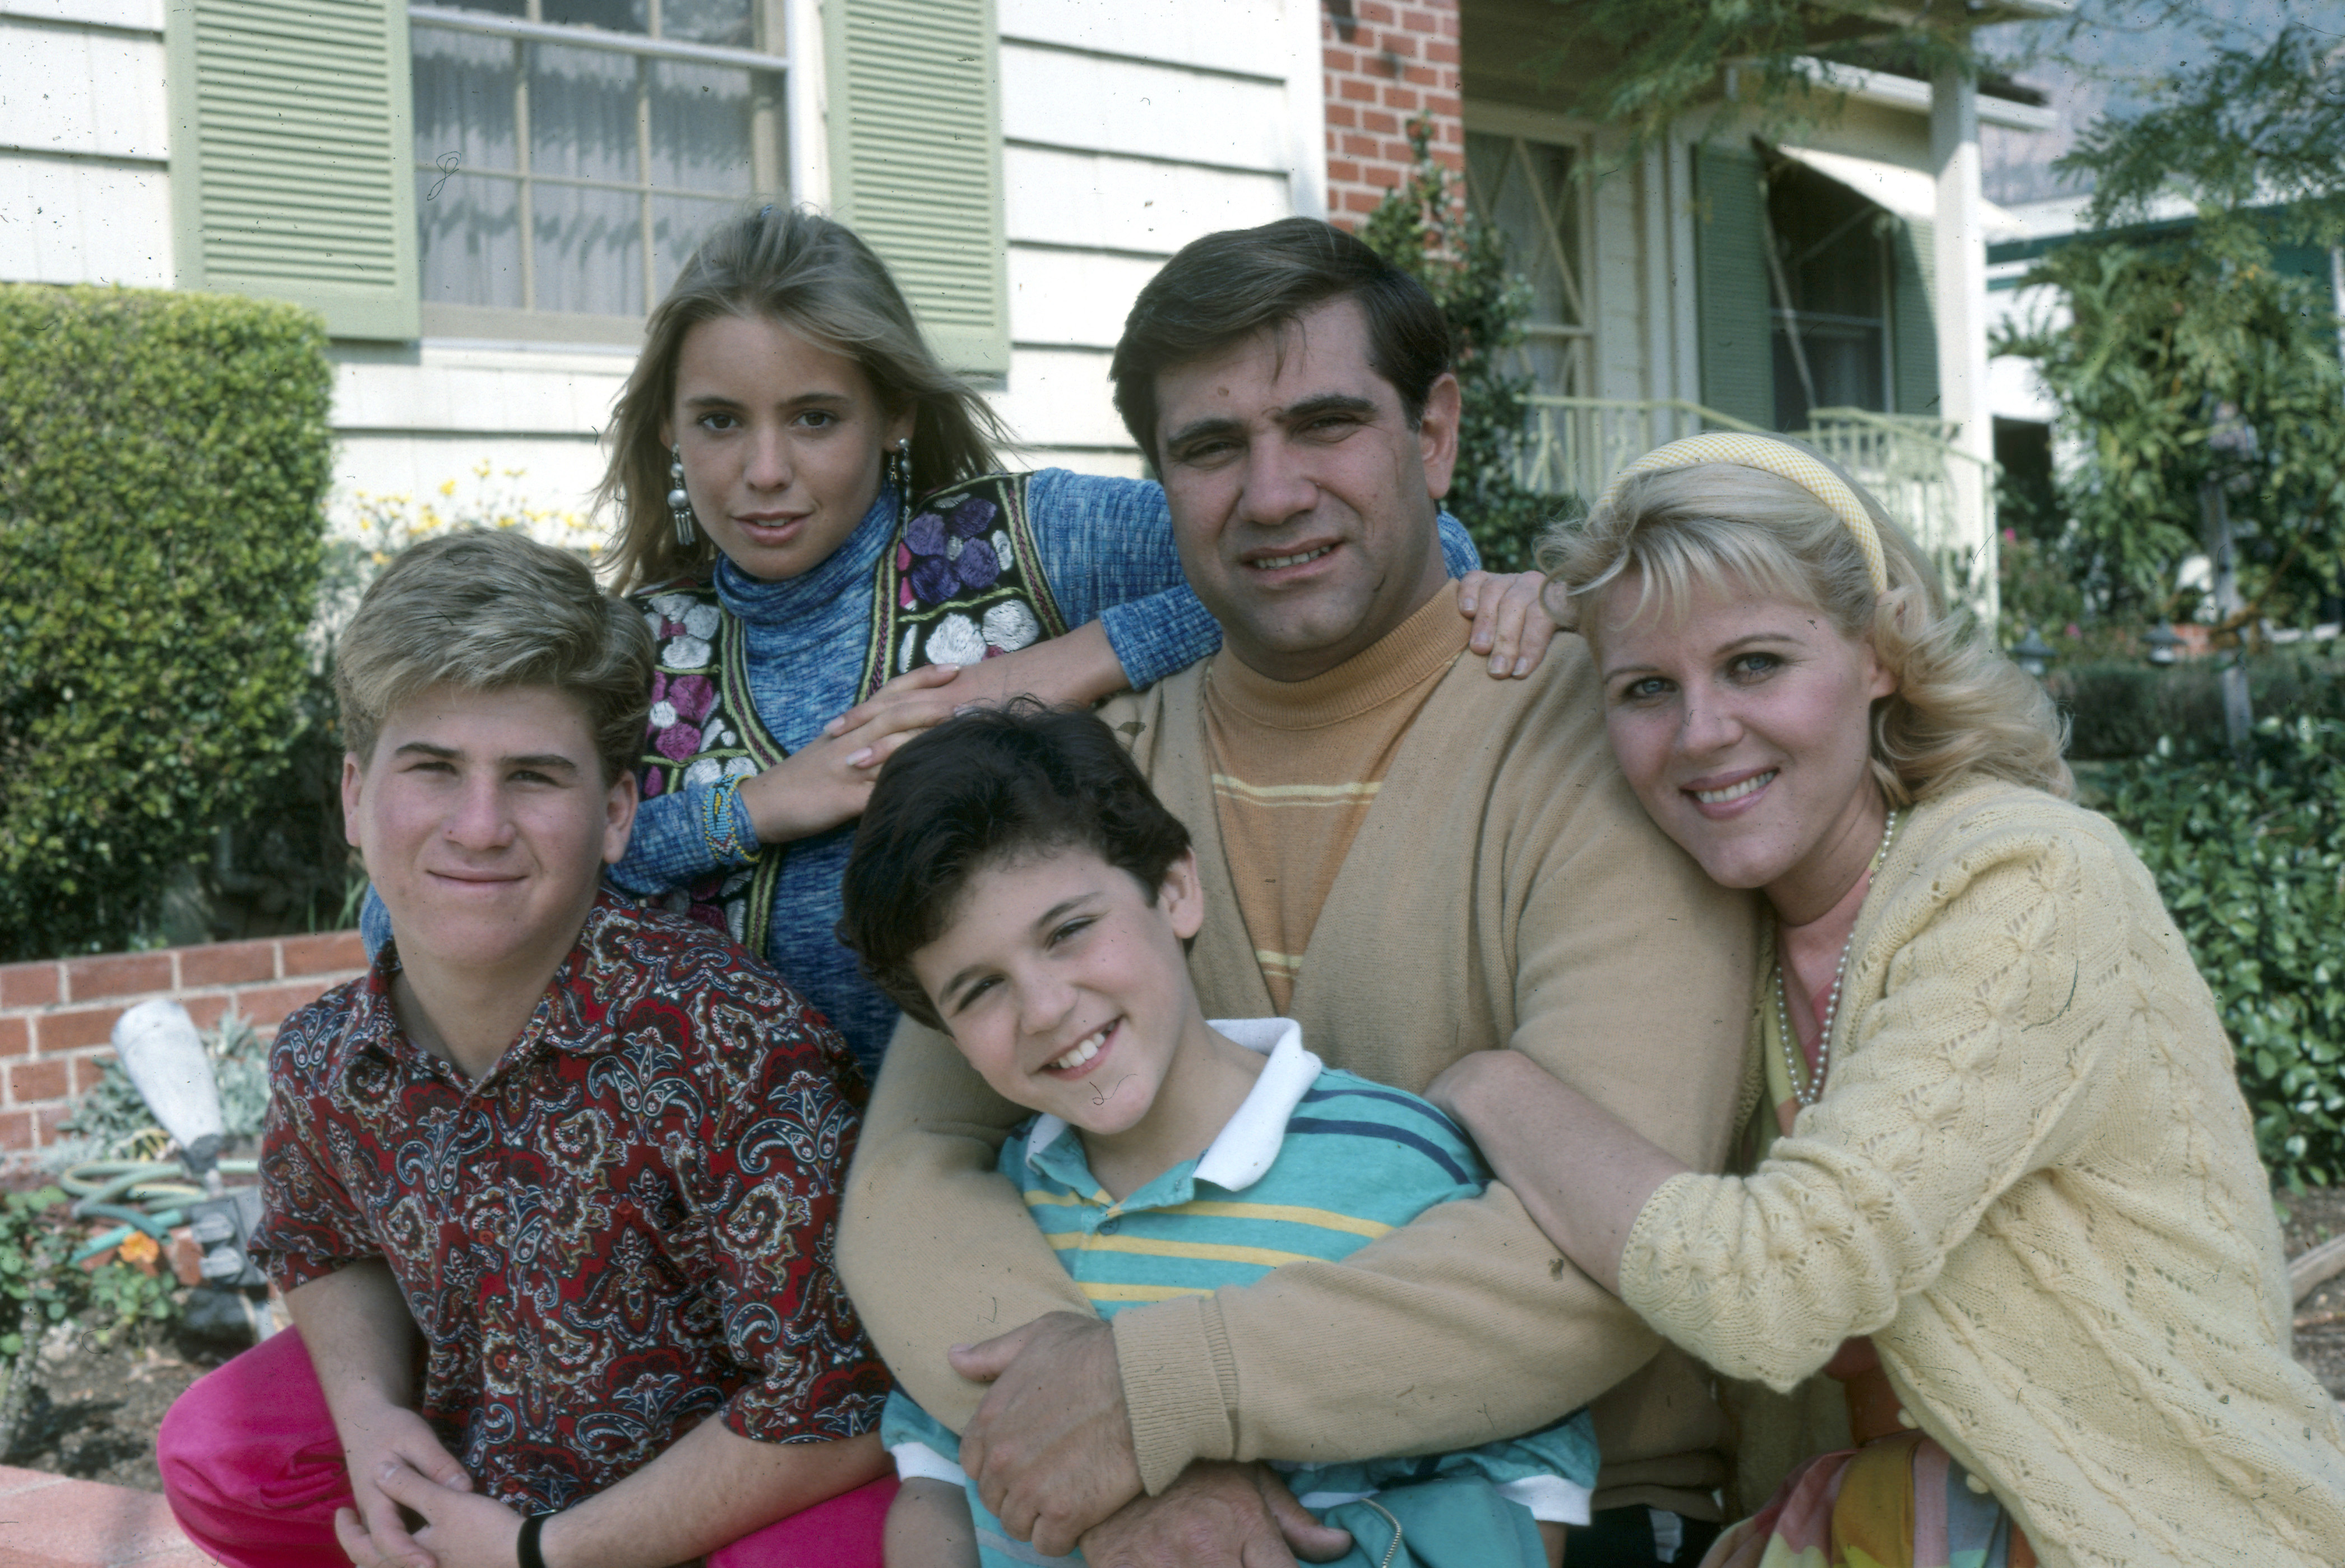 Jason Hervey, Olivia D'Abo, Fred Savage, Dan Lauria, and Alley Mills on season one of "The Wonder Years" on March 22, 1988 | Source: Getty Images